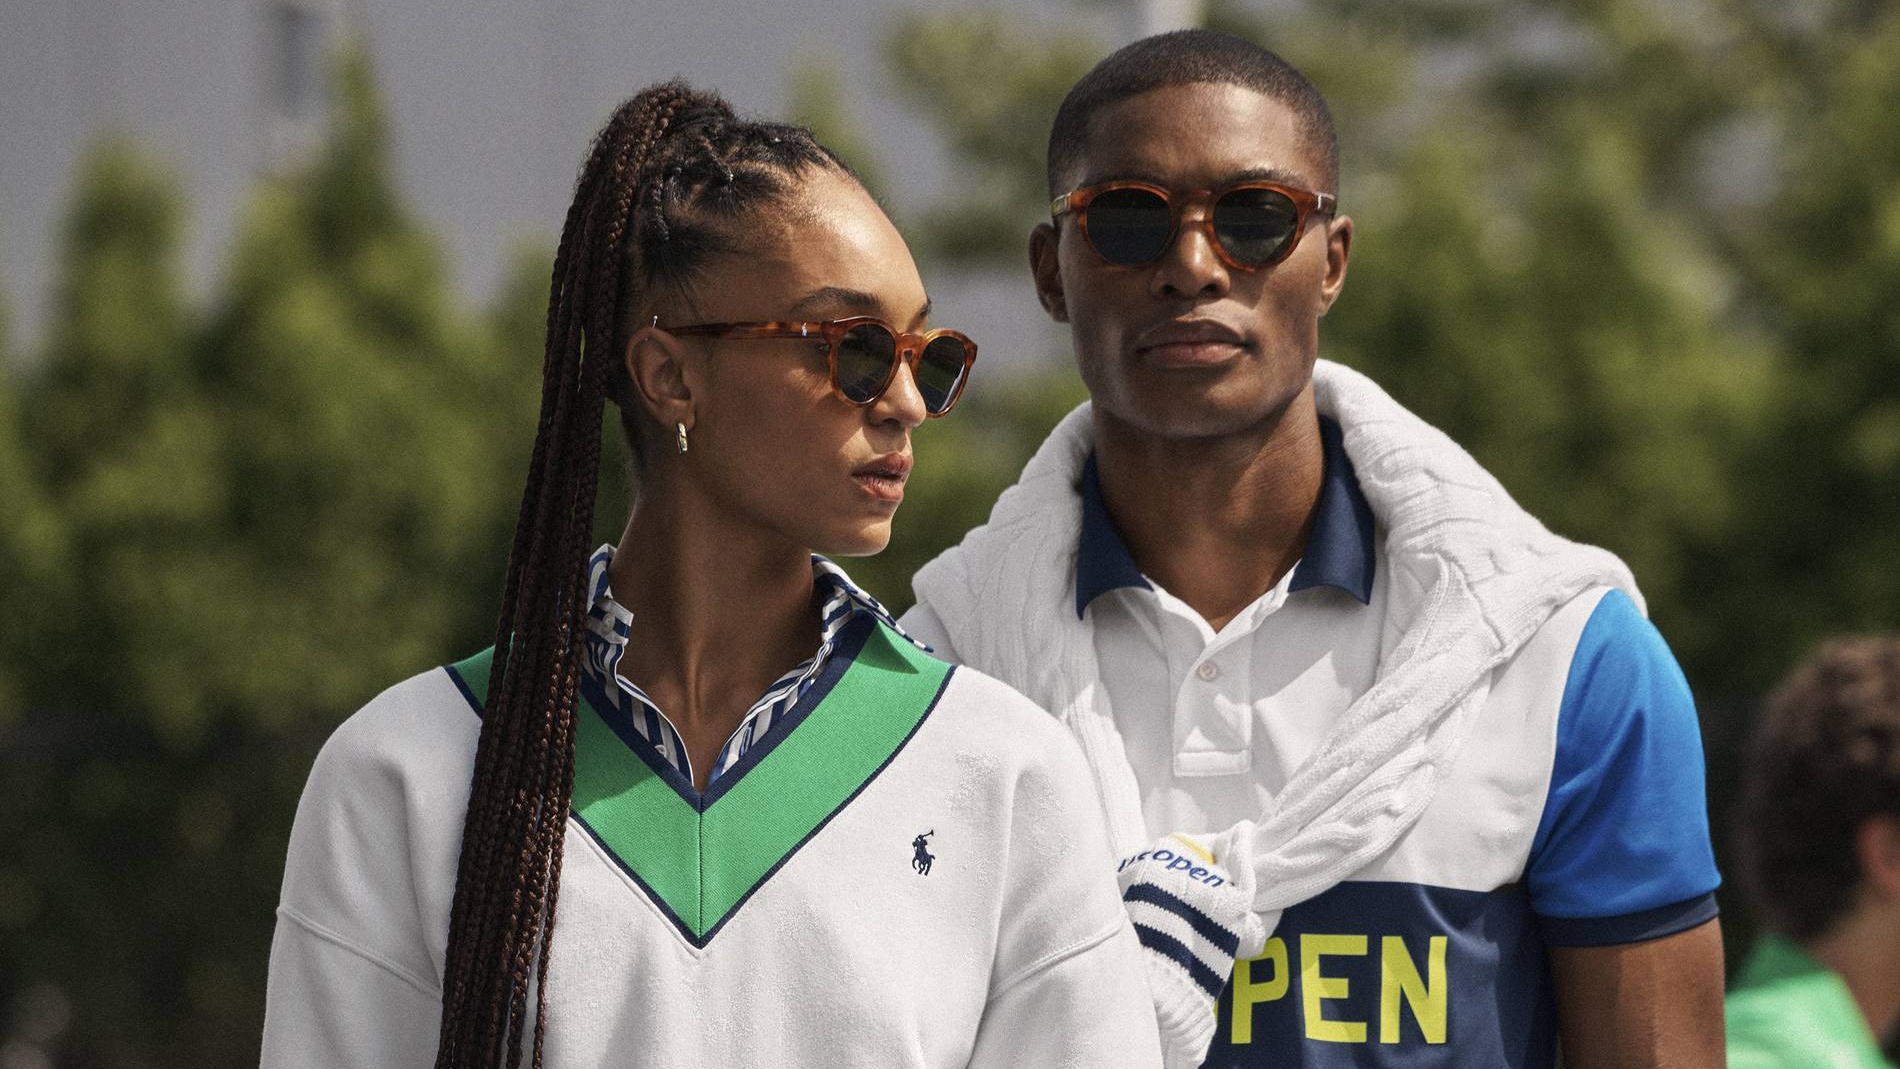 See Ralph Lauren's US Open Tennis Collection For 2022